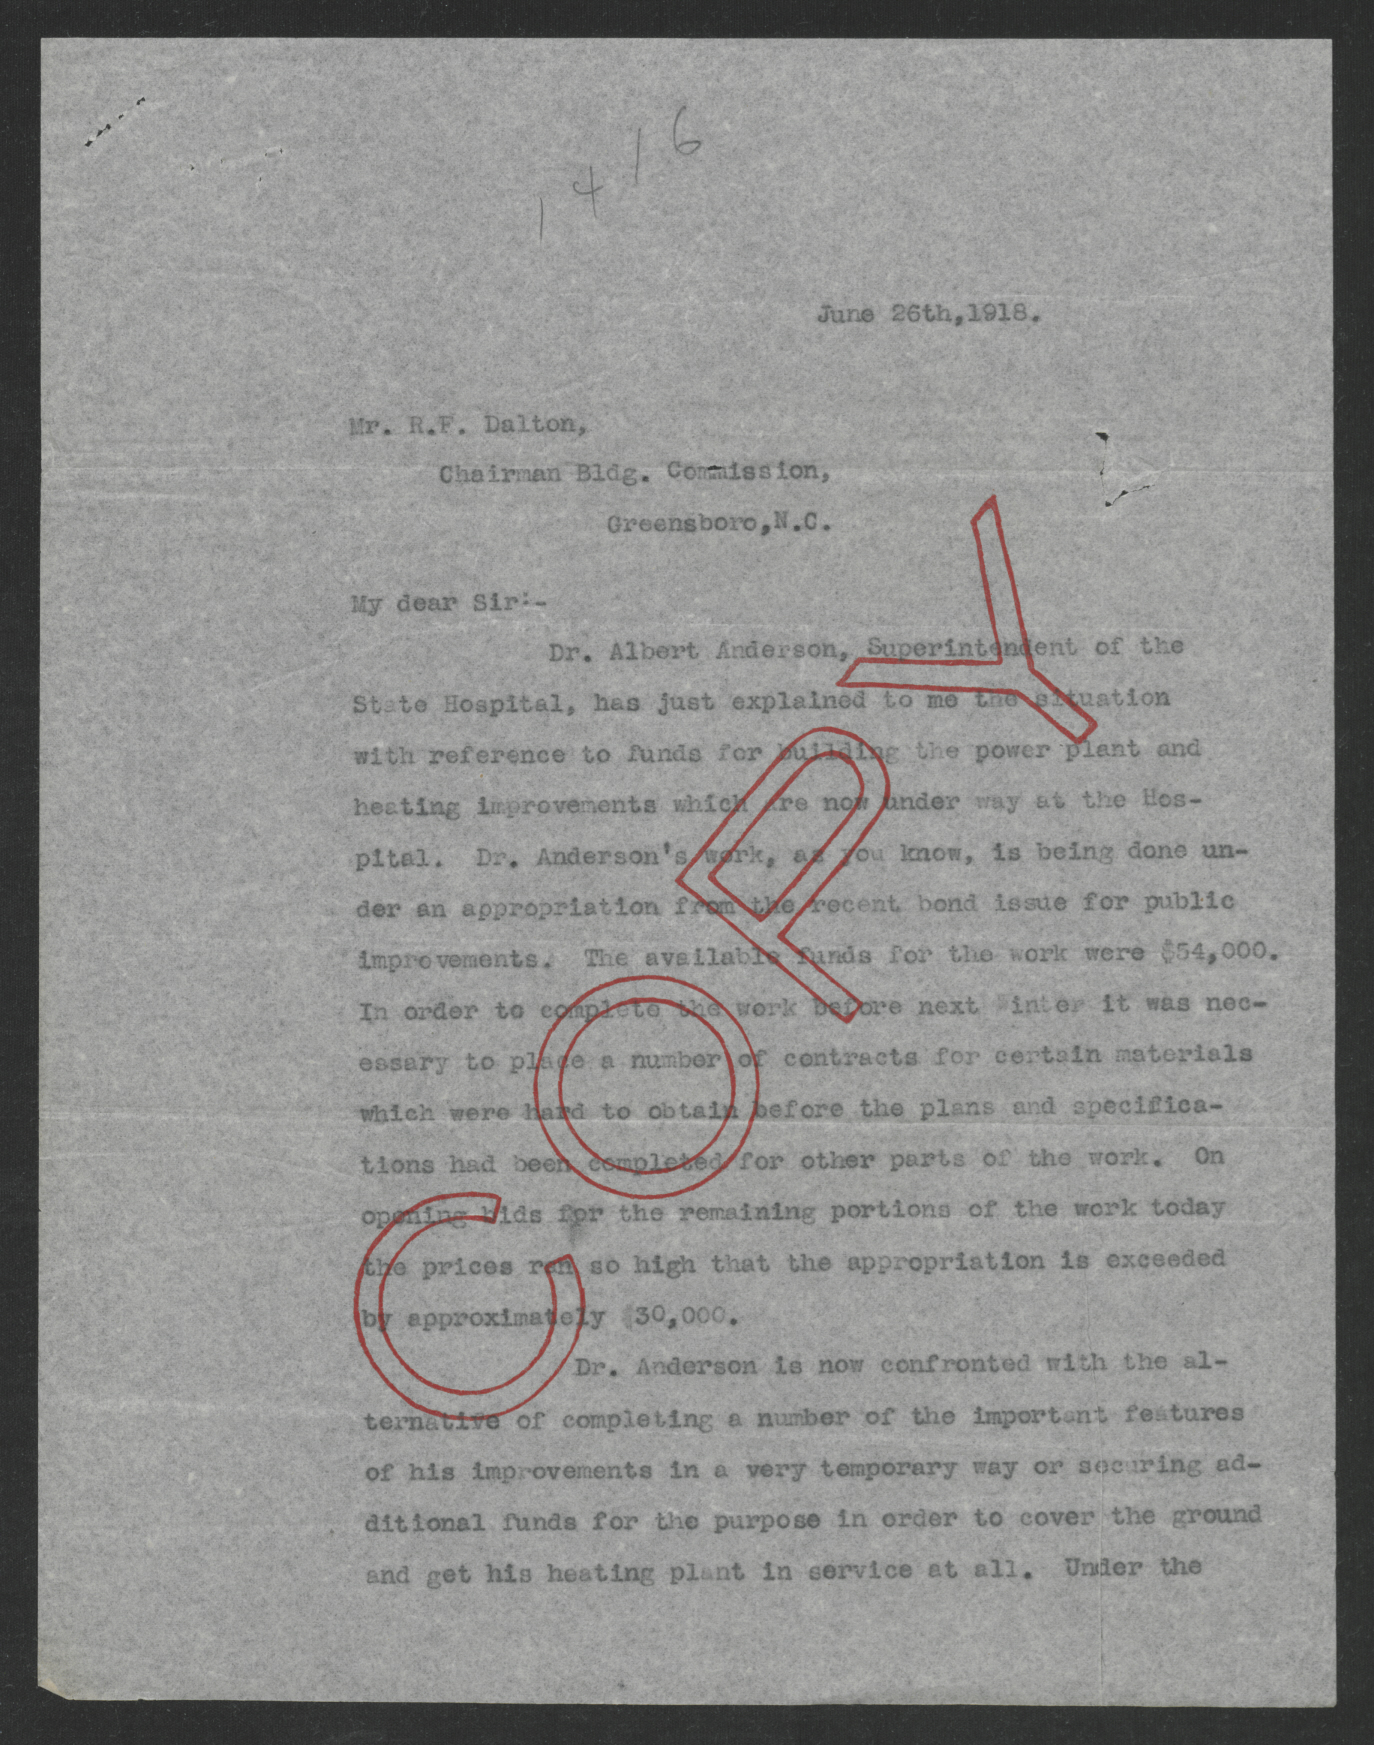 Letter from Thomas W. Bickett to Robert F. Dalton, June 26, 1918, page 1